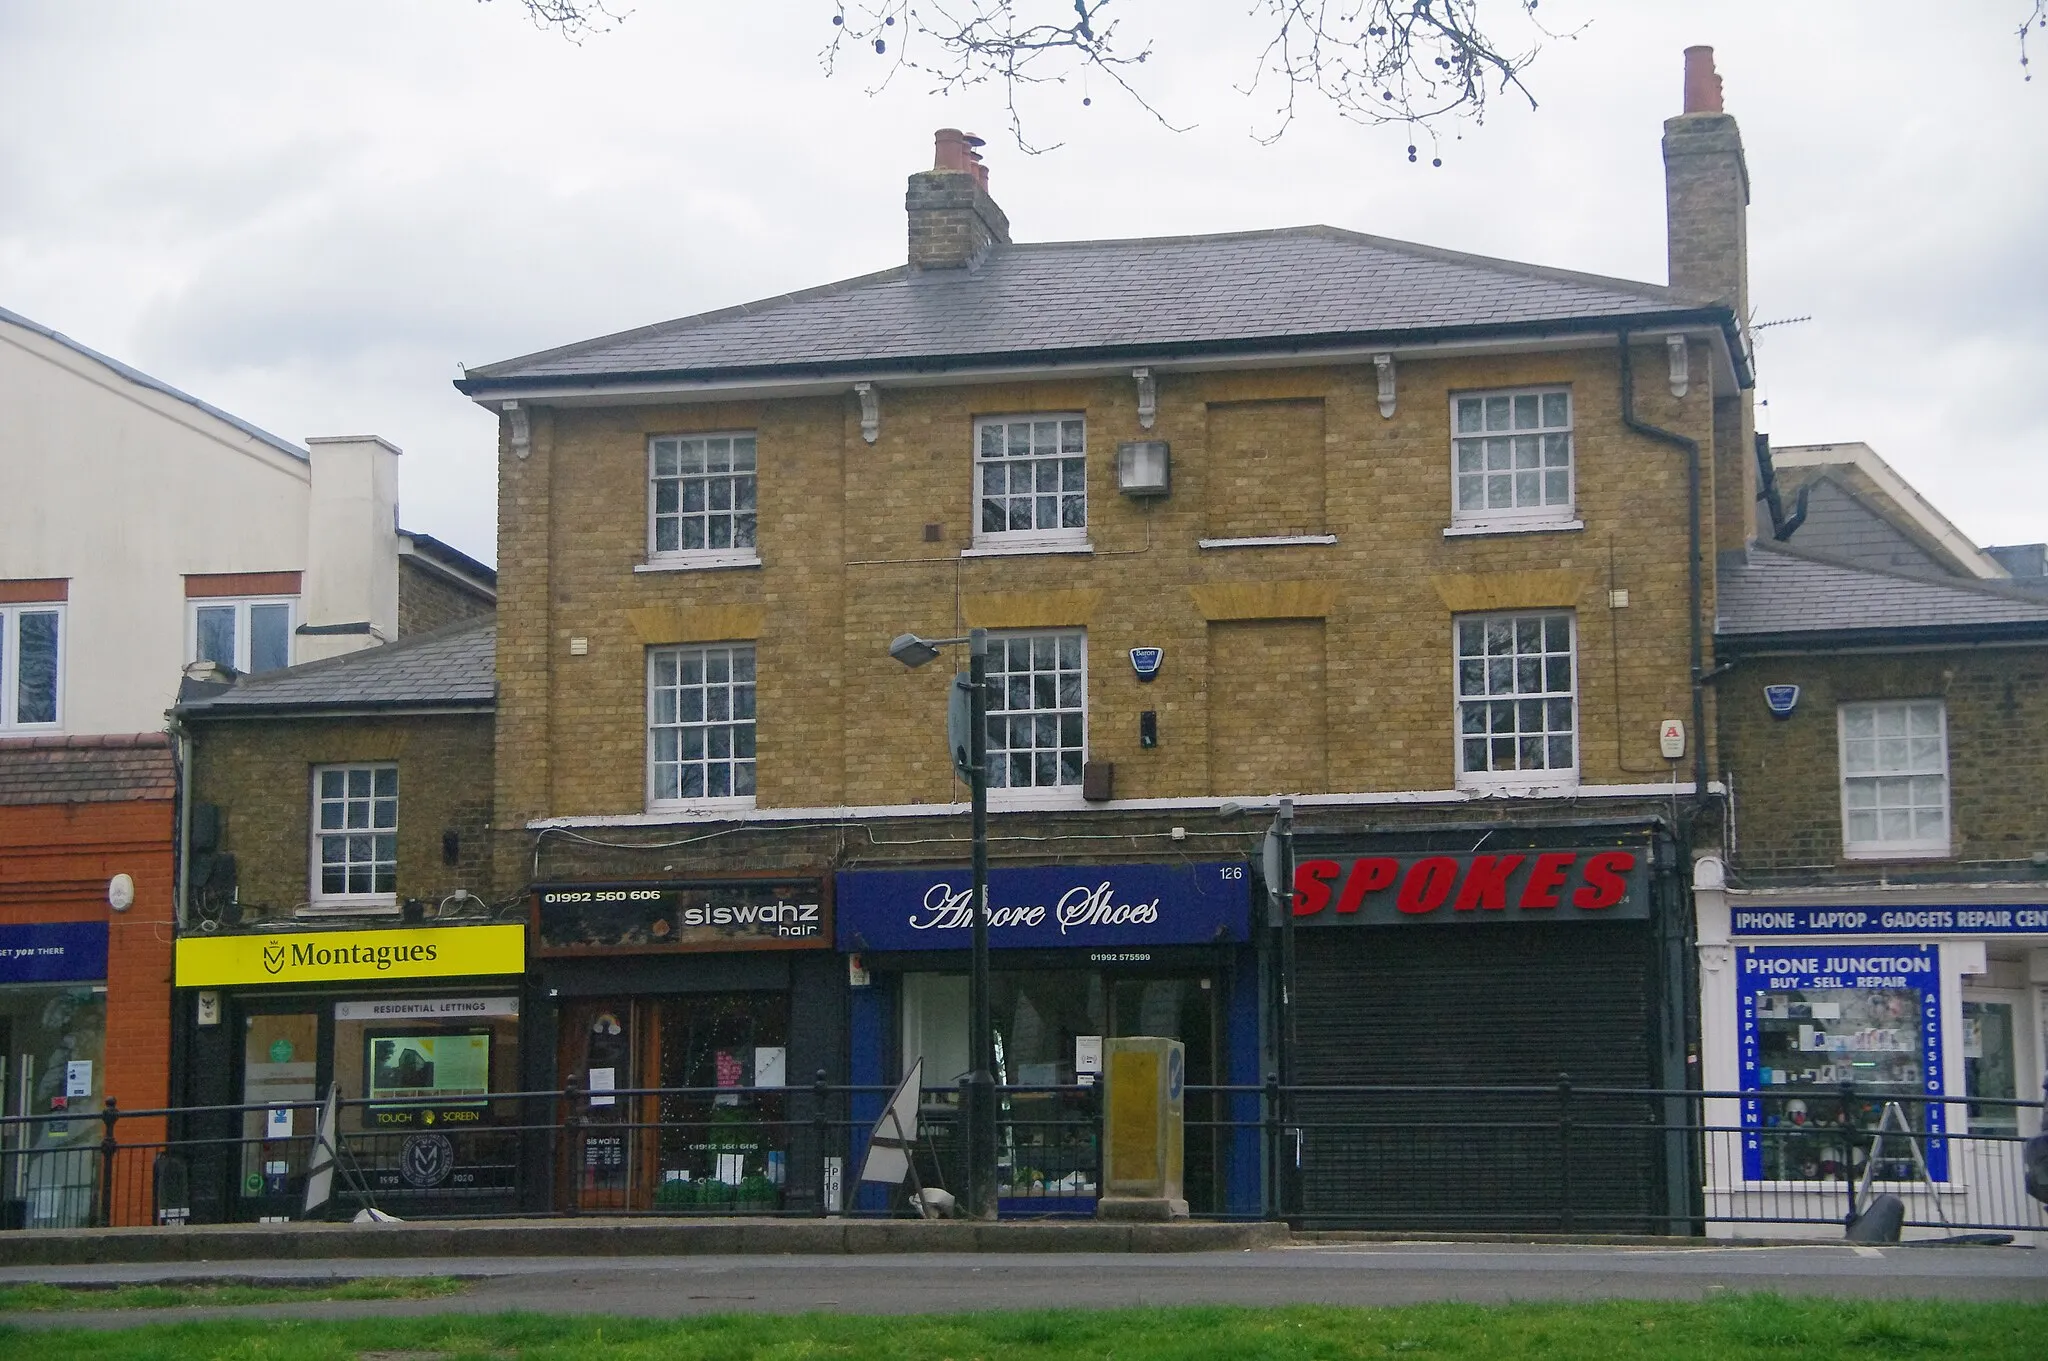 Photo showing: Shops on Epping High Street (6), Essex - April 2021 - showing Montagues estate agents, Siswahz hairdresssers, Amore shoe shop and Spokes cycle shop,